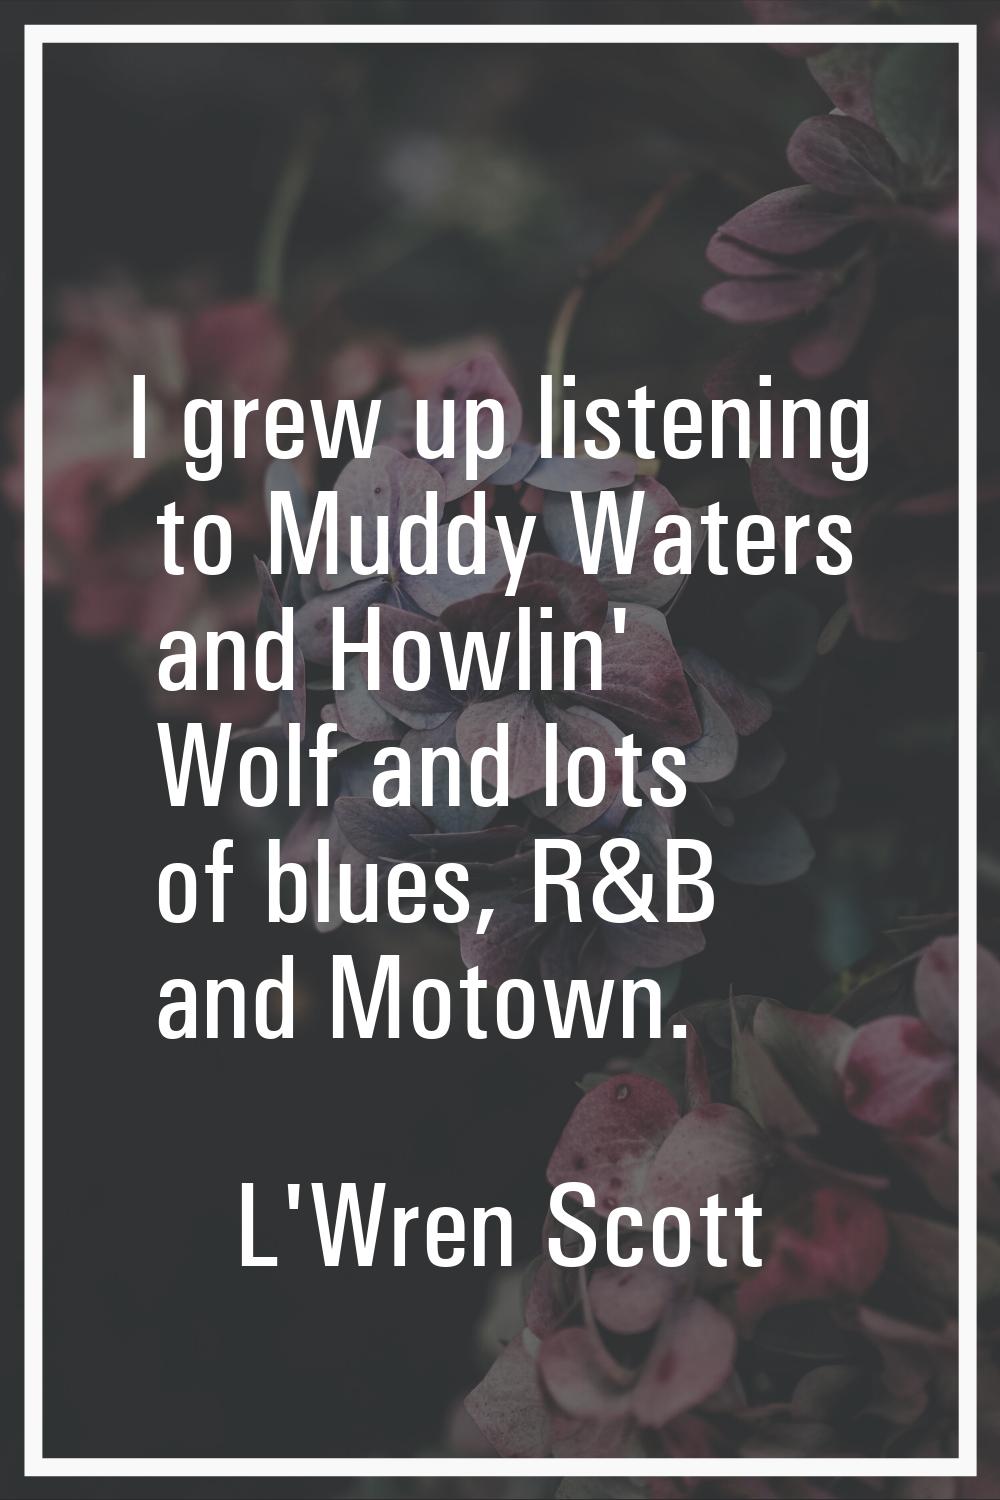 I grew up listening to Muddy Waters and Howlin' Wolf and lots of blues, R&B and Motown.